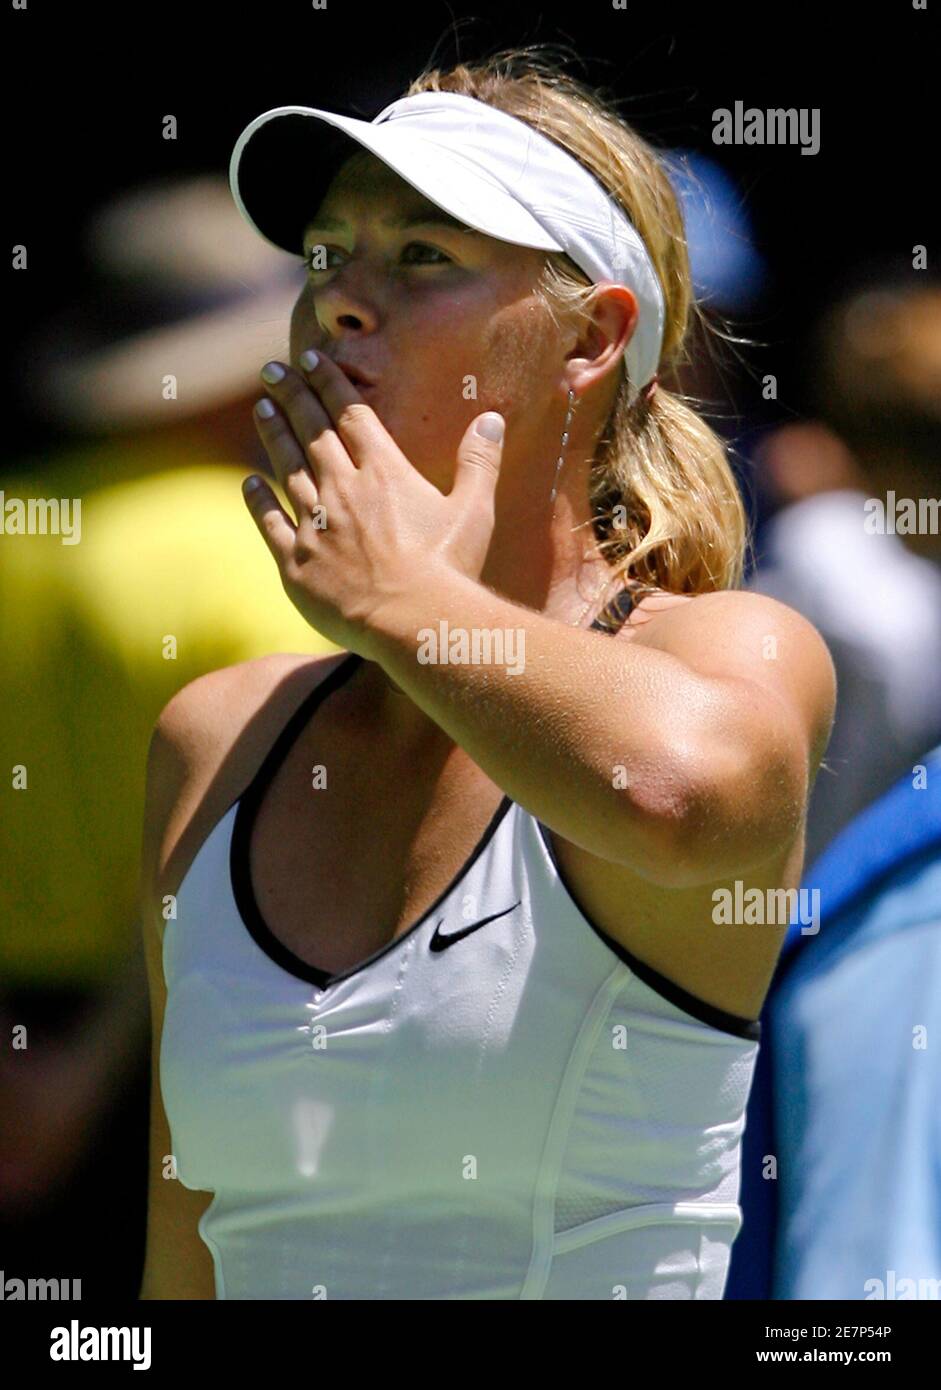 Russia's Maria Sharapova blows a kiss after winning her match against  Camille Pin of France at the Australian Open tennis tournament in Melbourne  January 16, 2007. REUTERS/David Gray (AUSTRALIA Stock Photo - Alamy